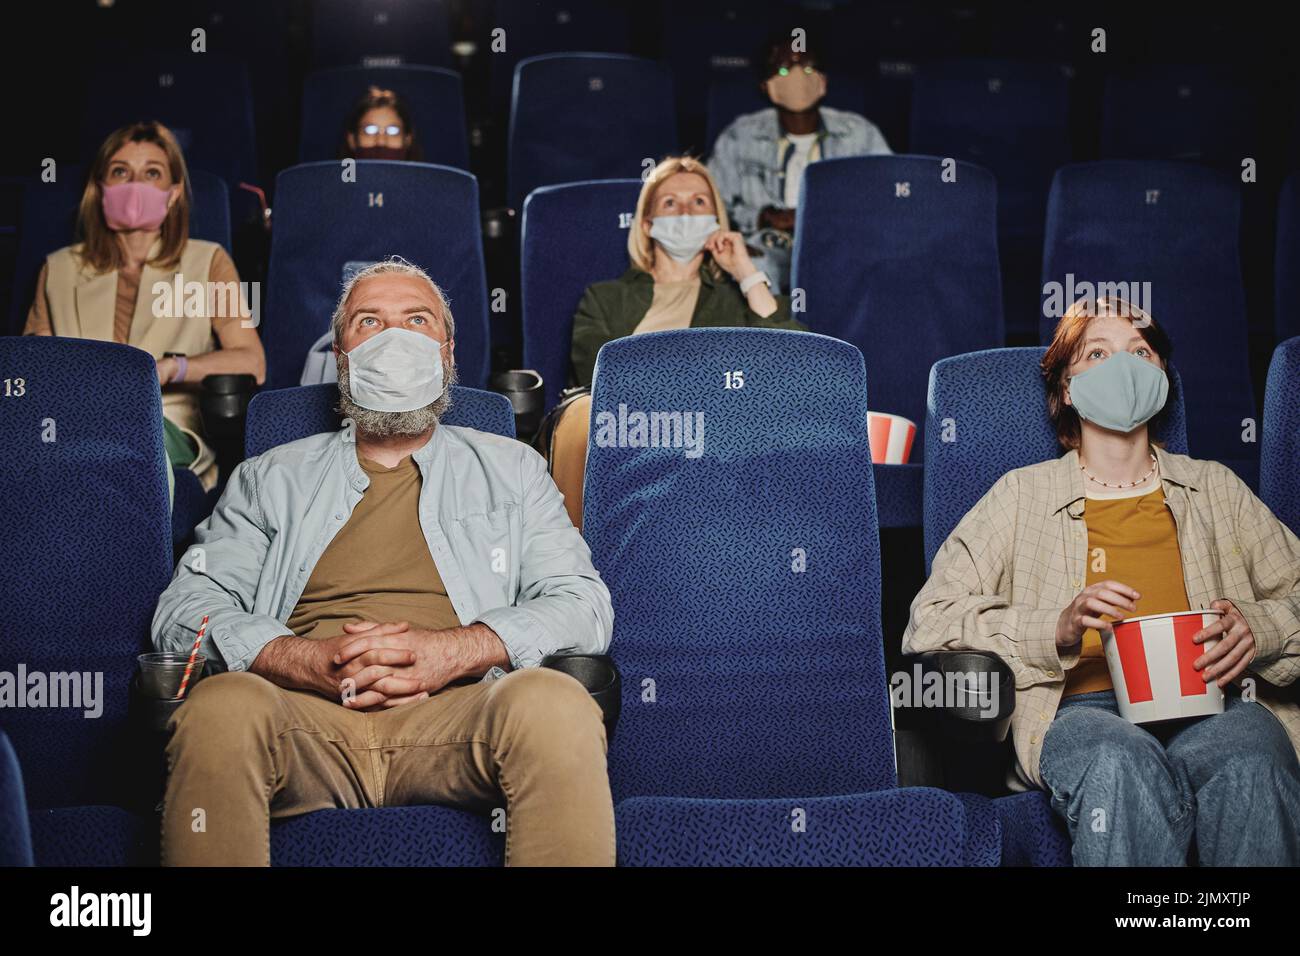 Group of people wearing masks, keeping distance from each other watching movie at cinema during quarantine Stock Photo